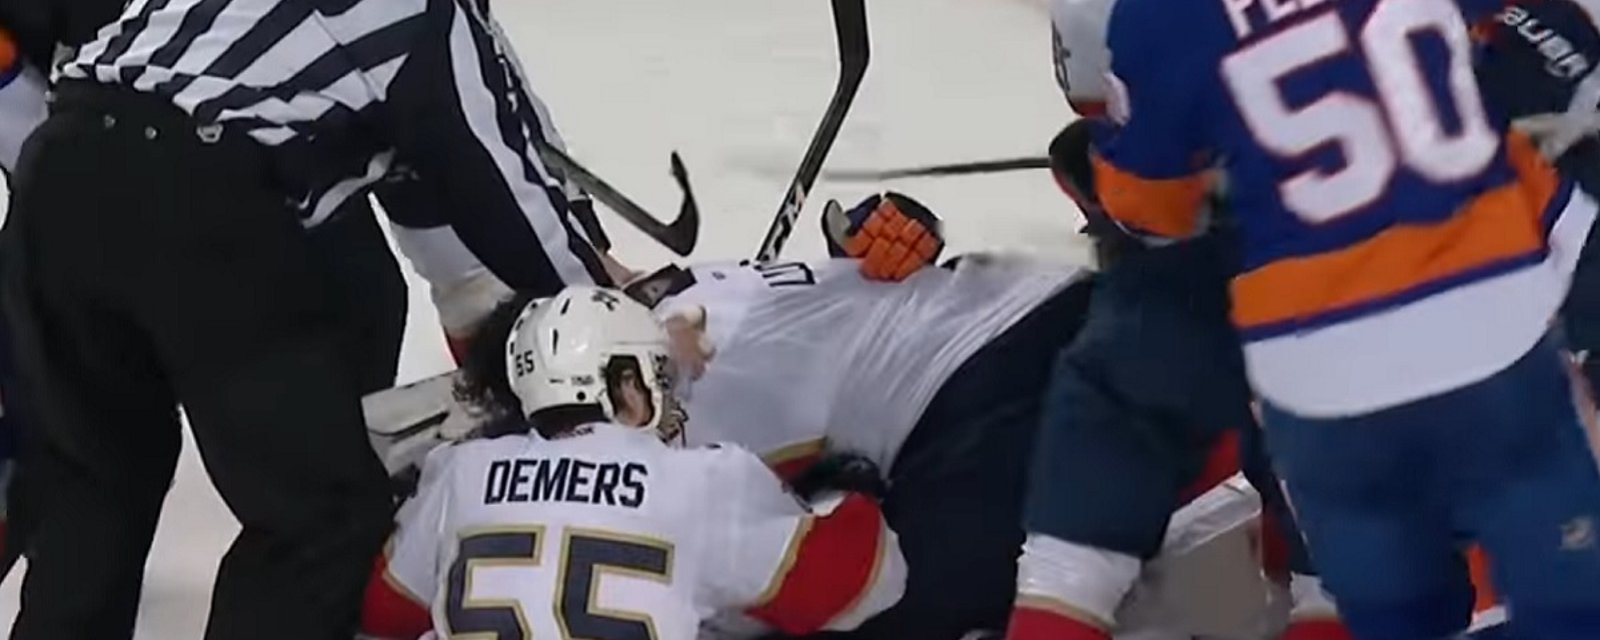 Roberto Luongo loses his cool and goes after Cizikas on Wednesday night!